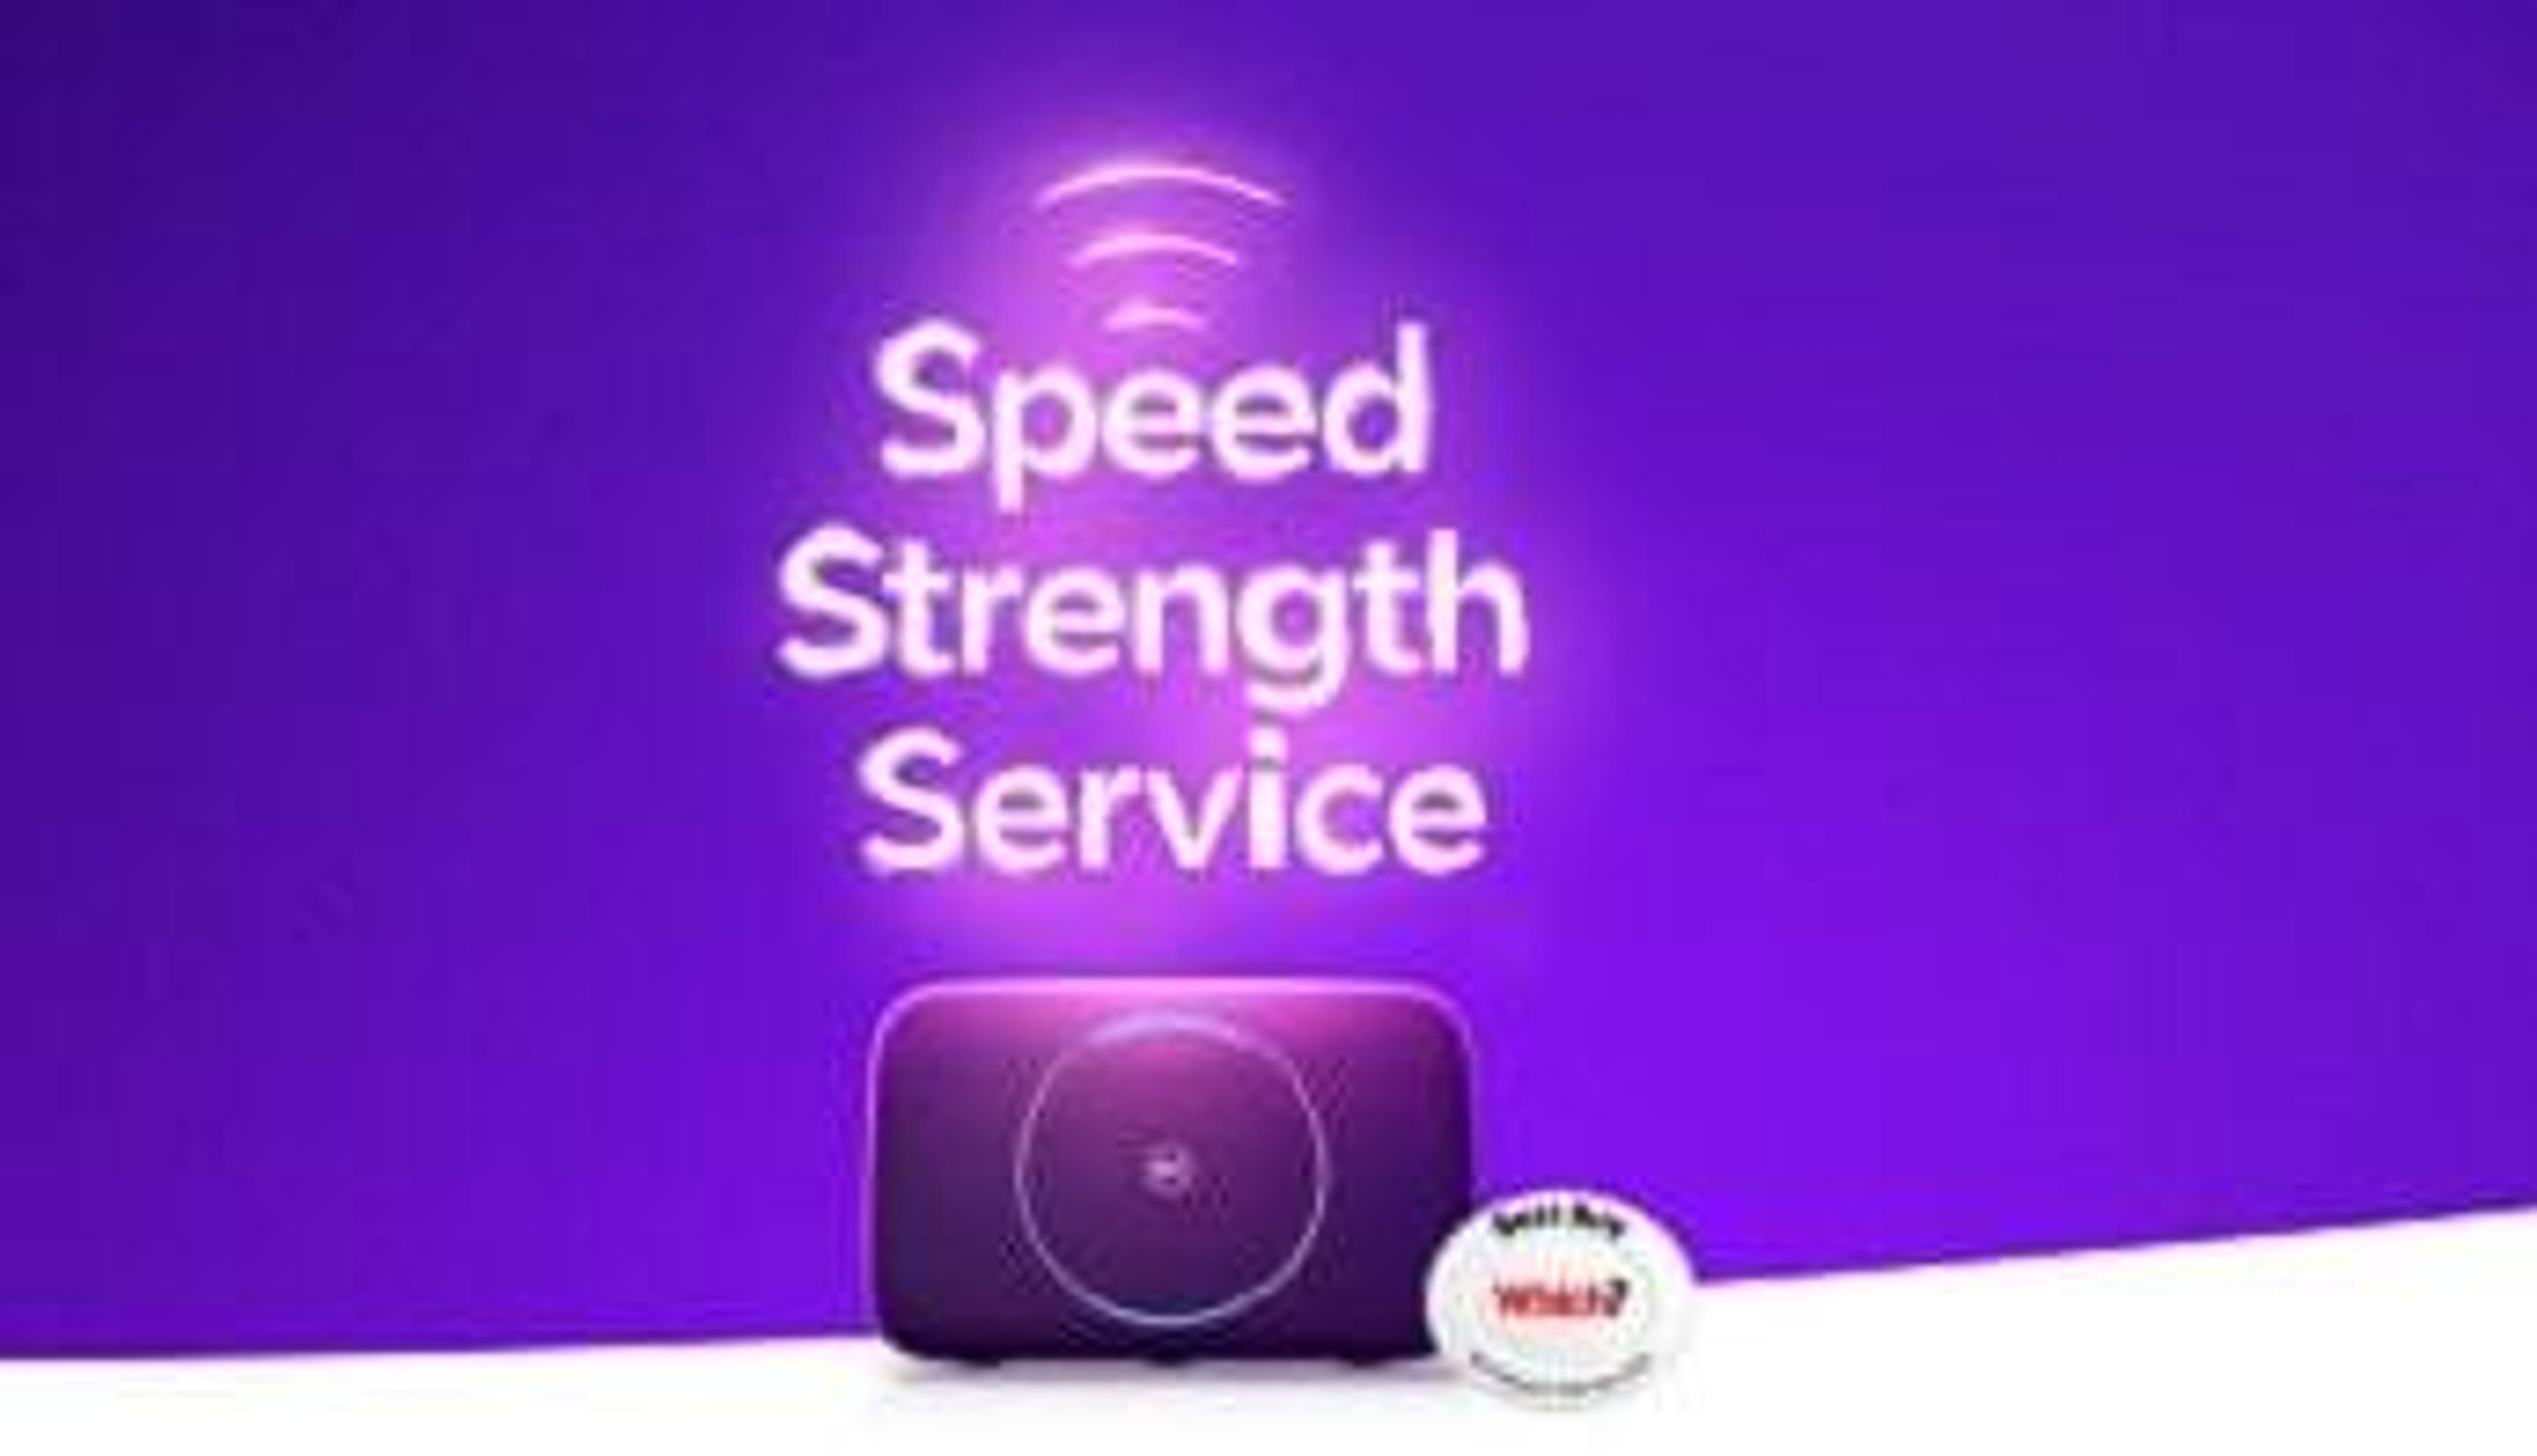  A BT WiFi router next to the Which? Best Buy Logo and the words "Speed. Strength. Service" 